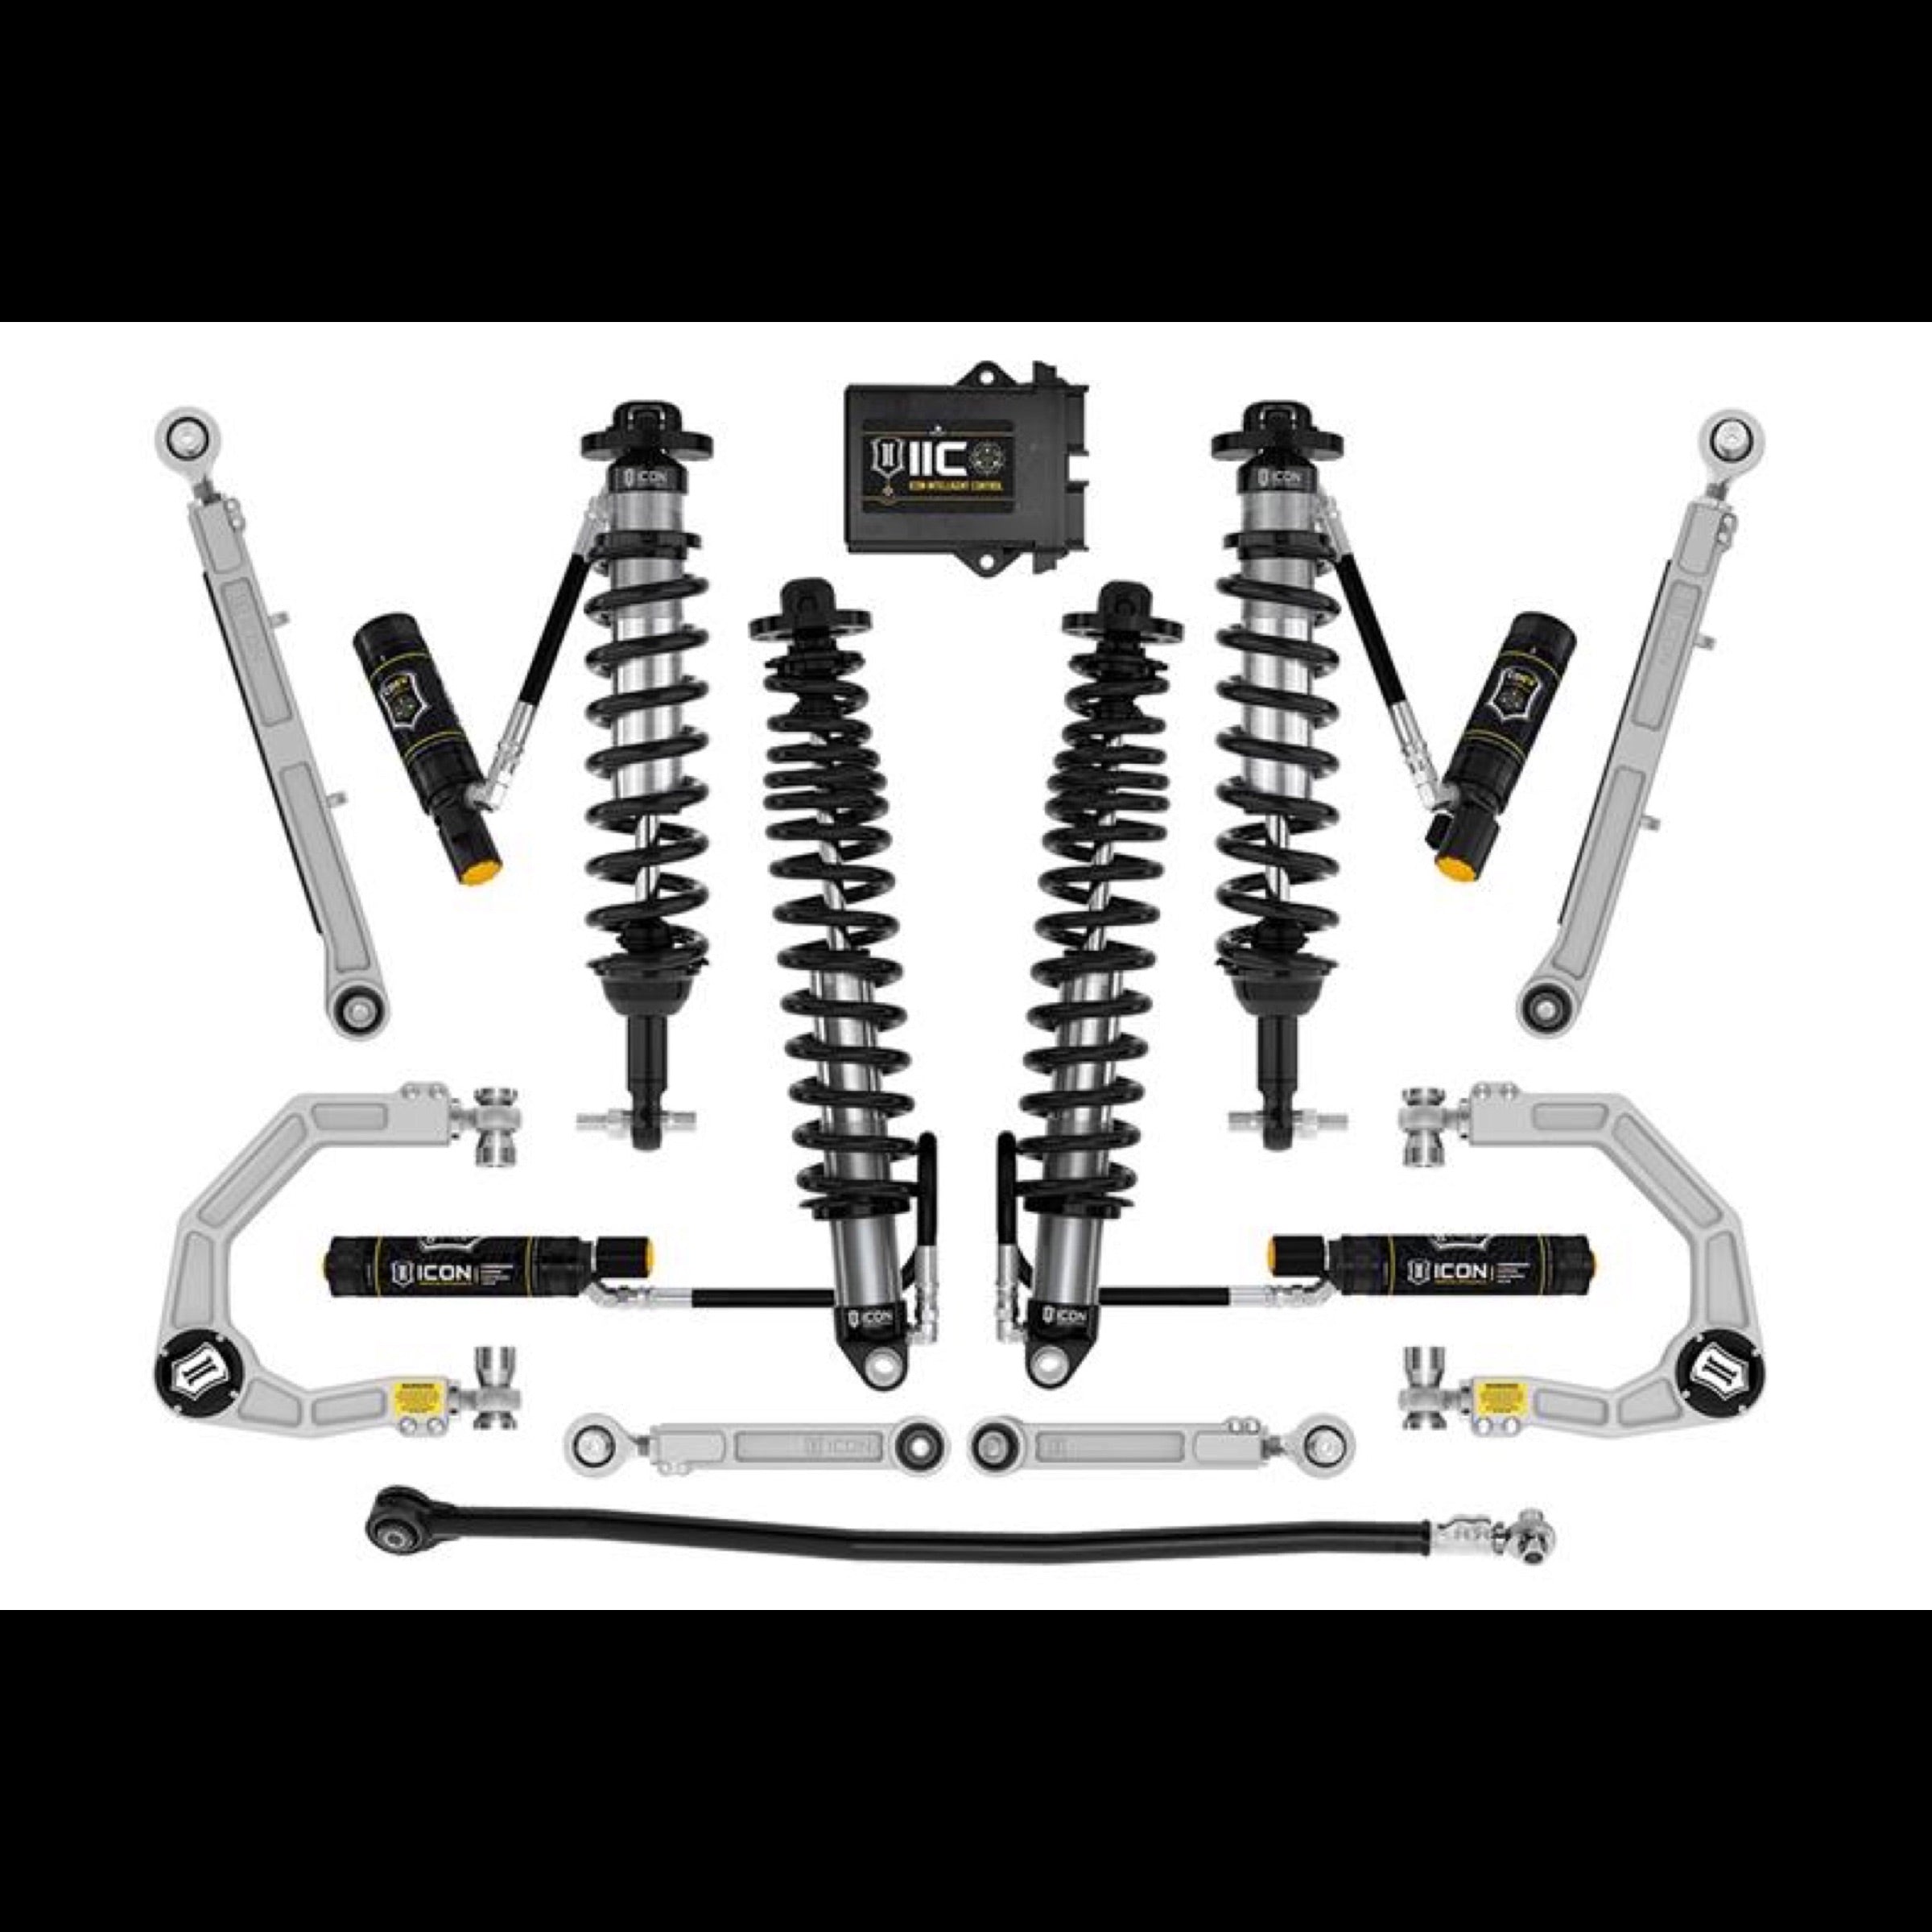 Ford Bronco Icon suspension system with adjustable coilovers and billet suspension arms